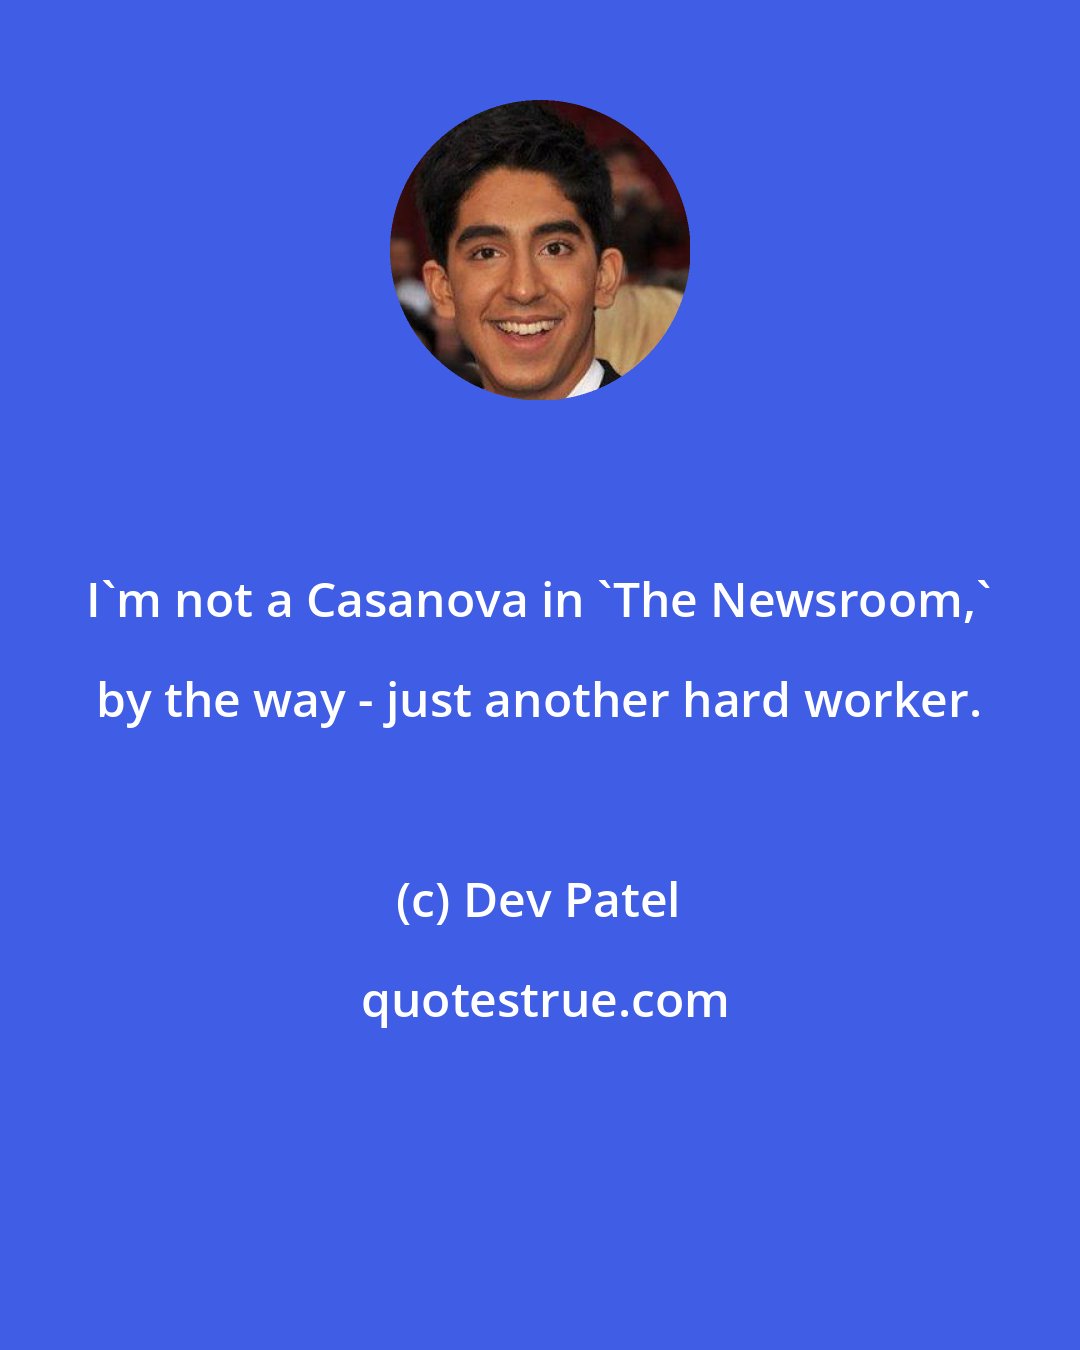 Dev Patel: I'm not a Casanova in 'The Newsroom,' by the way - just another hard worker.